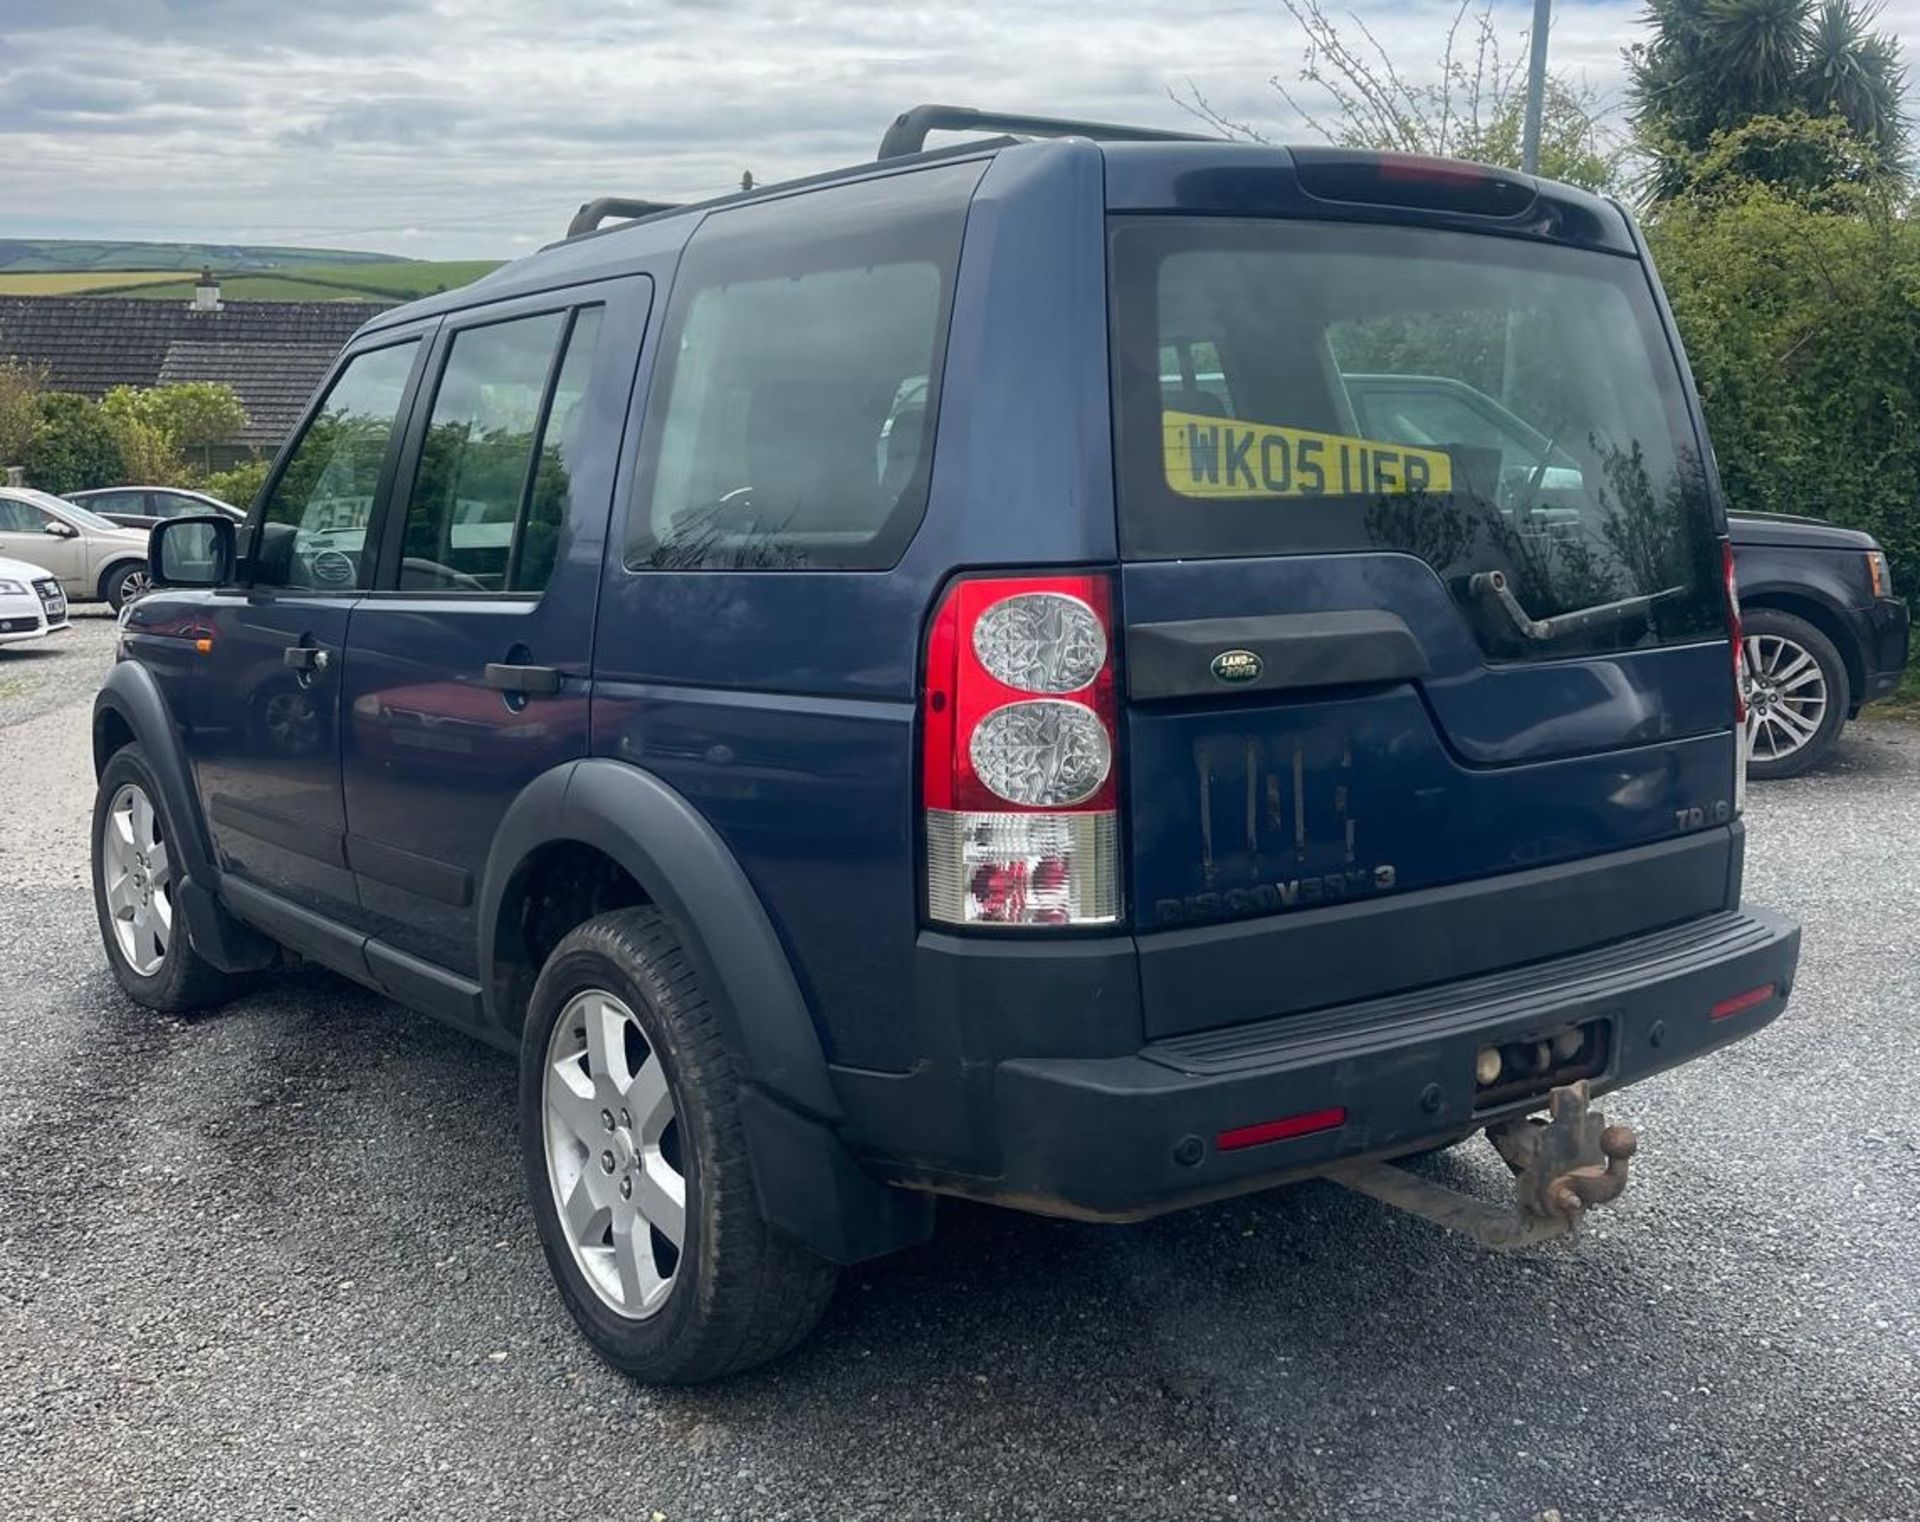 2005 Land Rover Discovery 3 Tdv6 S Auto - No Reserve - Image 6 of 14